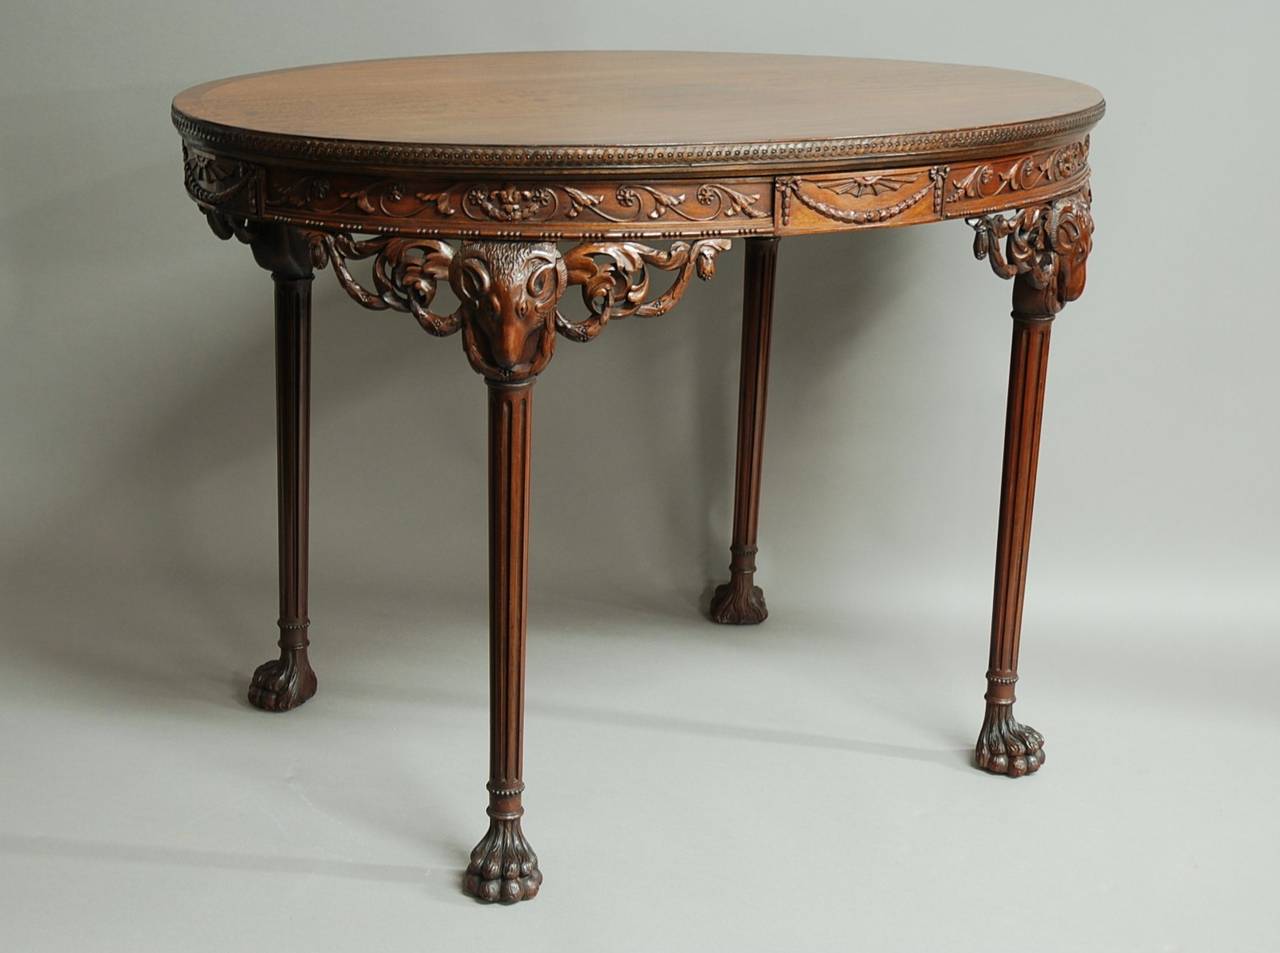 A superb quality early 20th century mahogany centre table in the manner of Robert Adam.

This table consists of a super quality, figured and crossbanded mahogany top with a sophisticated carved edge.

The recessed frieze consists of carved